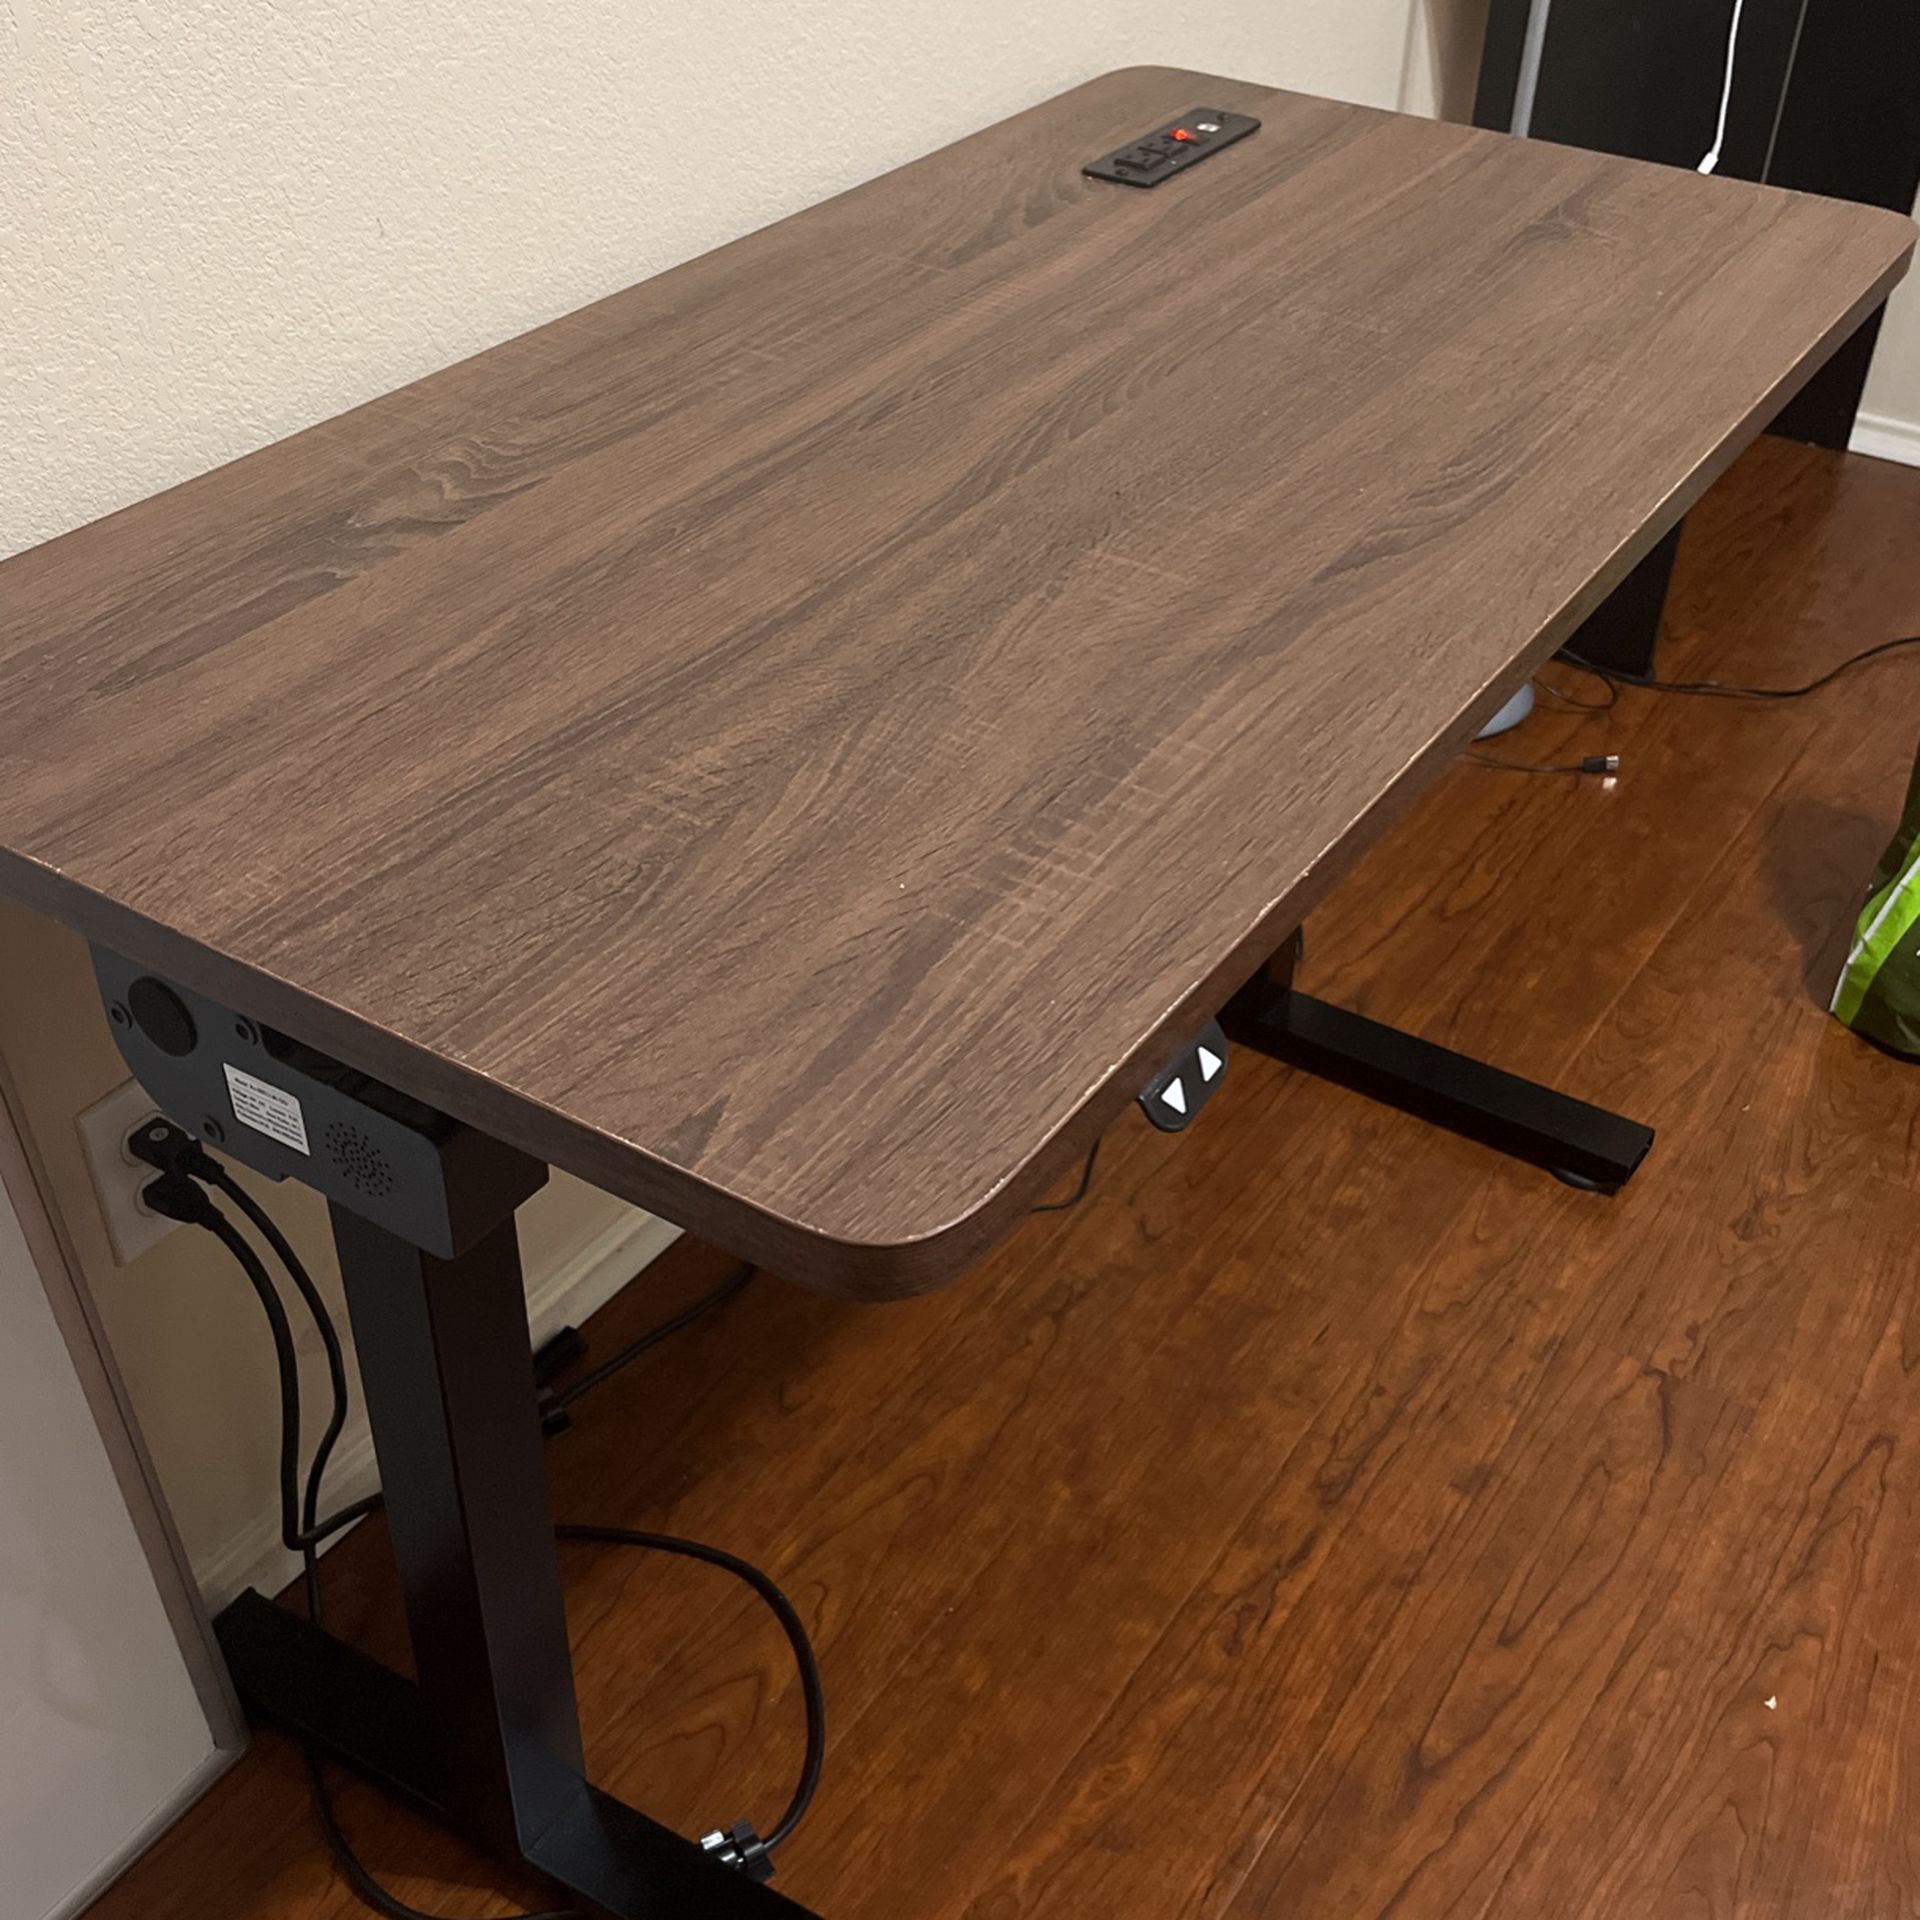 Standing Office Table for Sale in Austin, TX - OfferUp